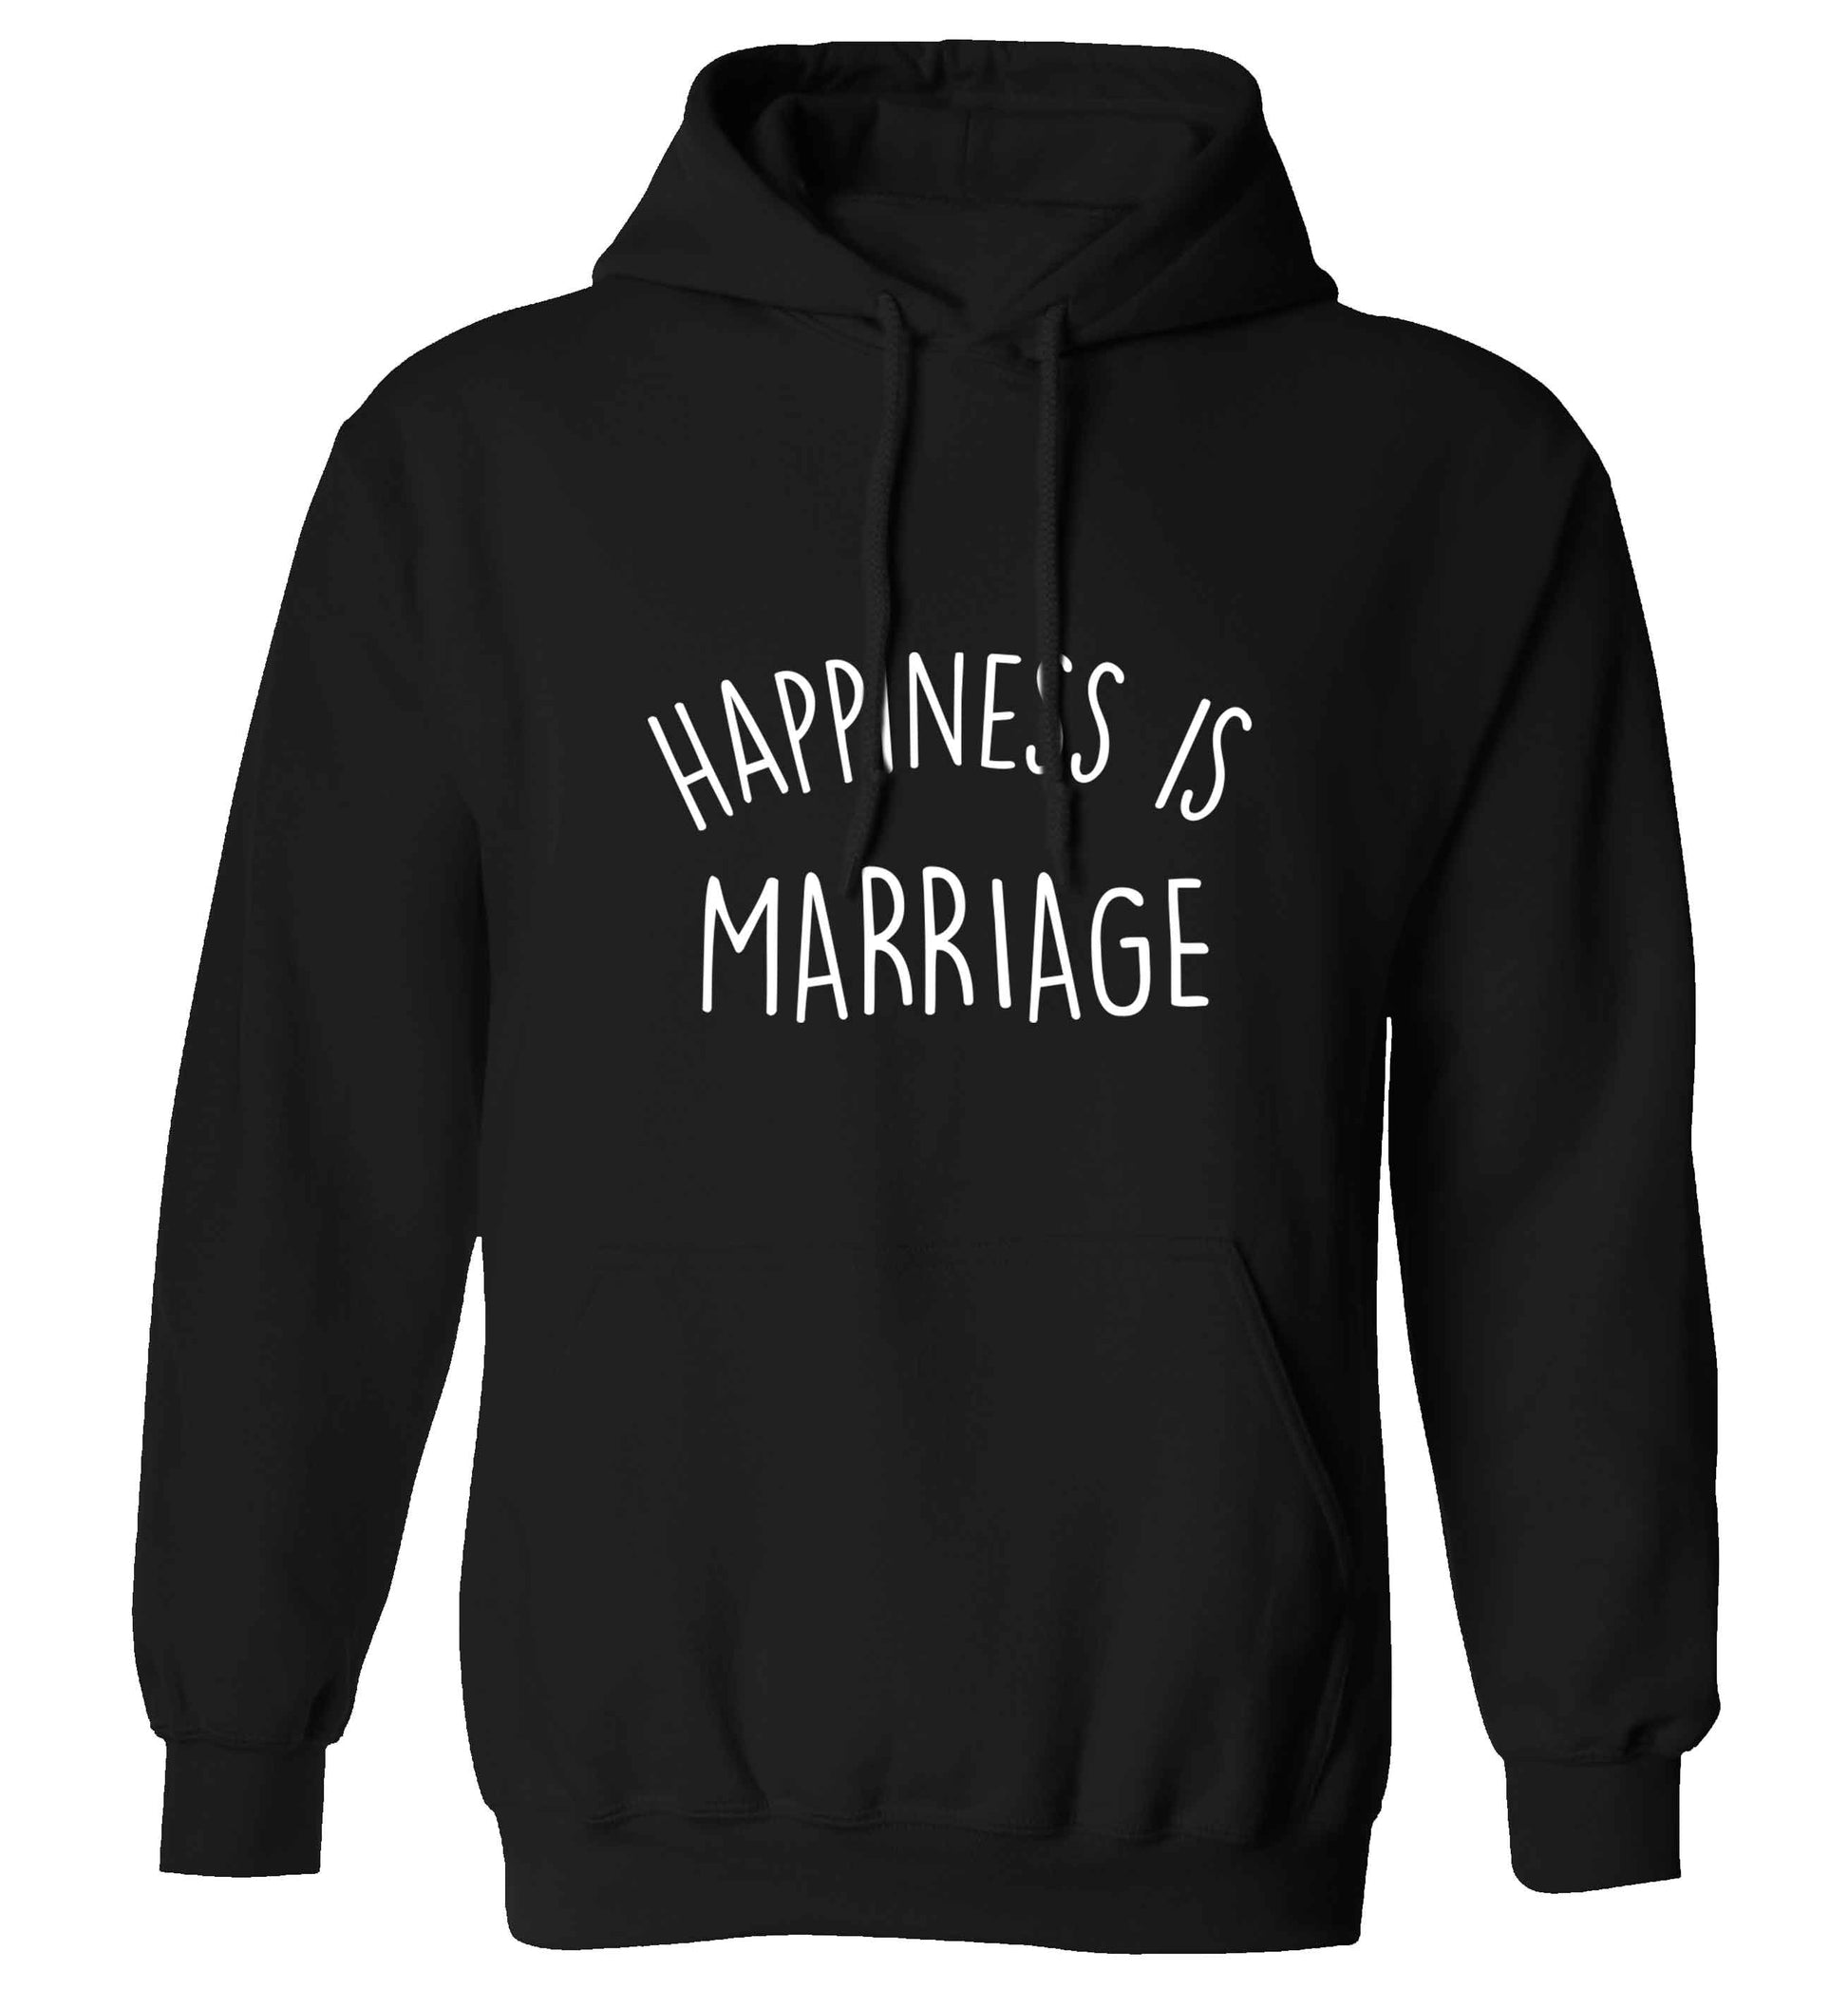 Happiness is marriage adults unisex black hoodie 2XL